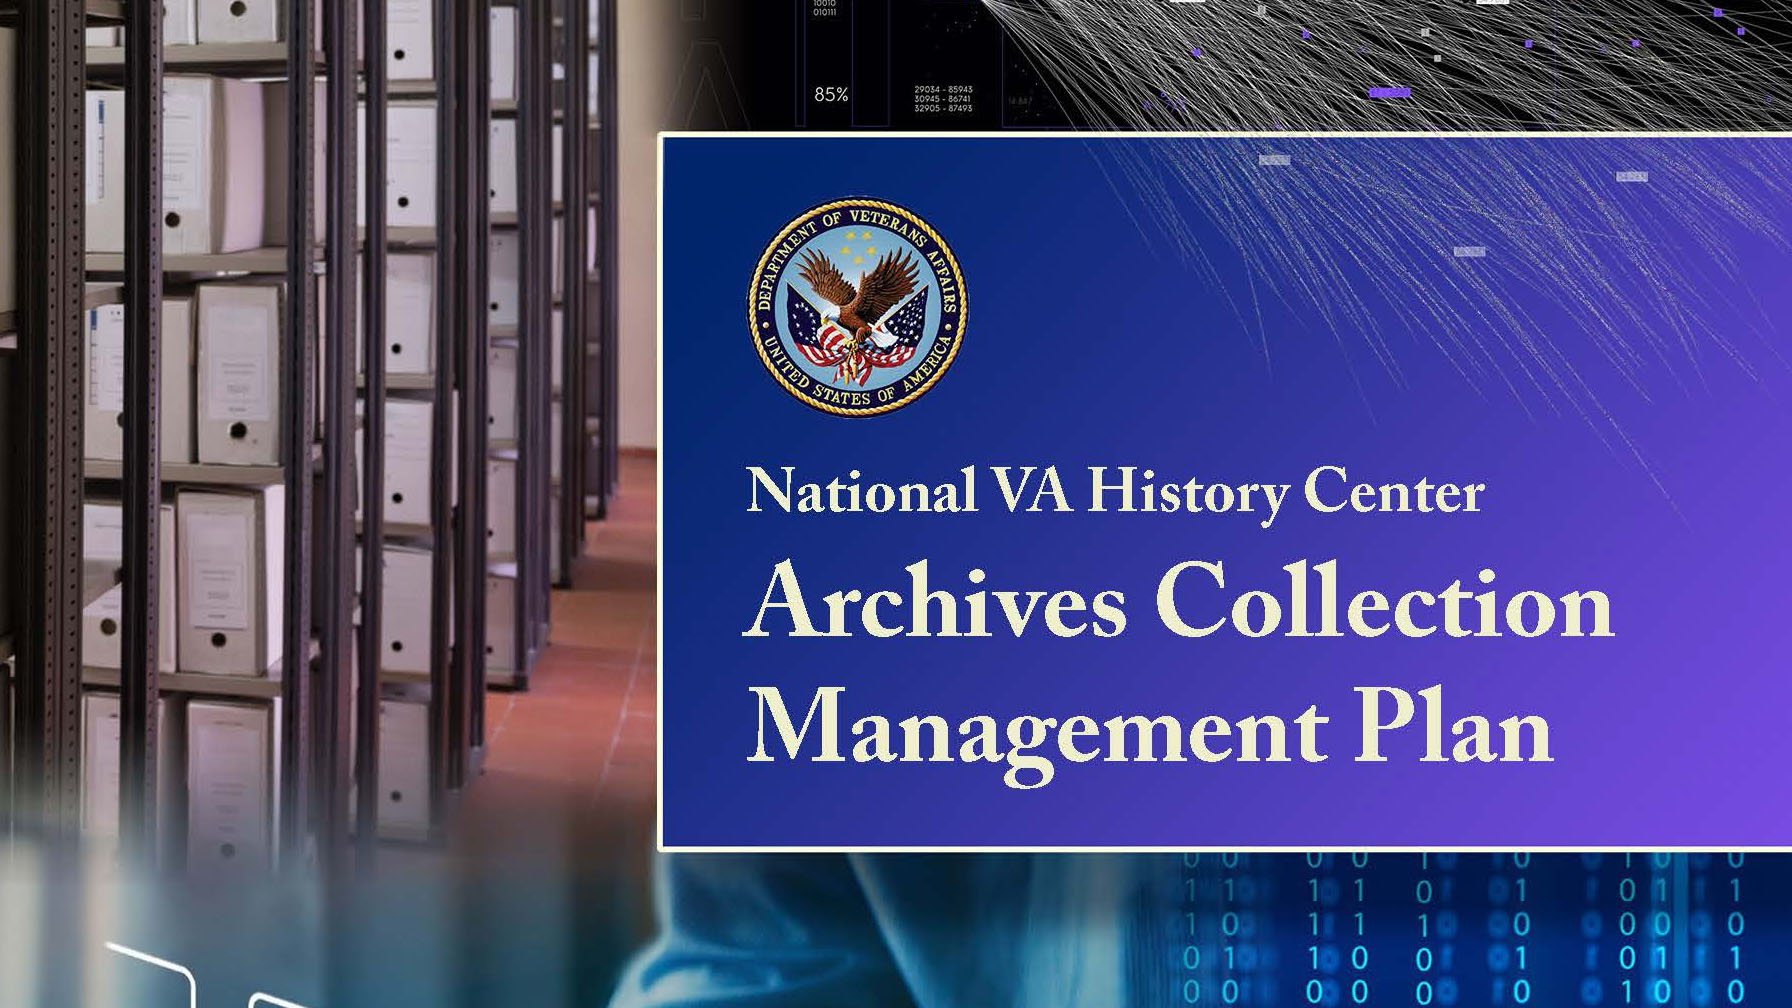 National VA History Center - Archives Collection Management Plan